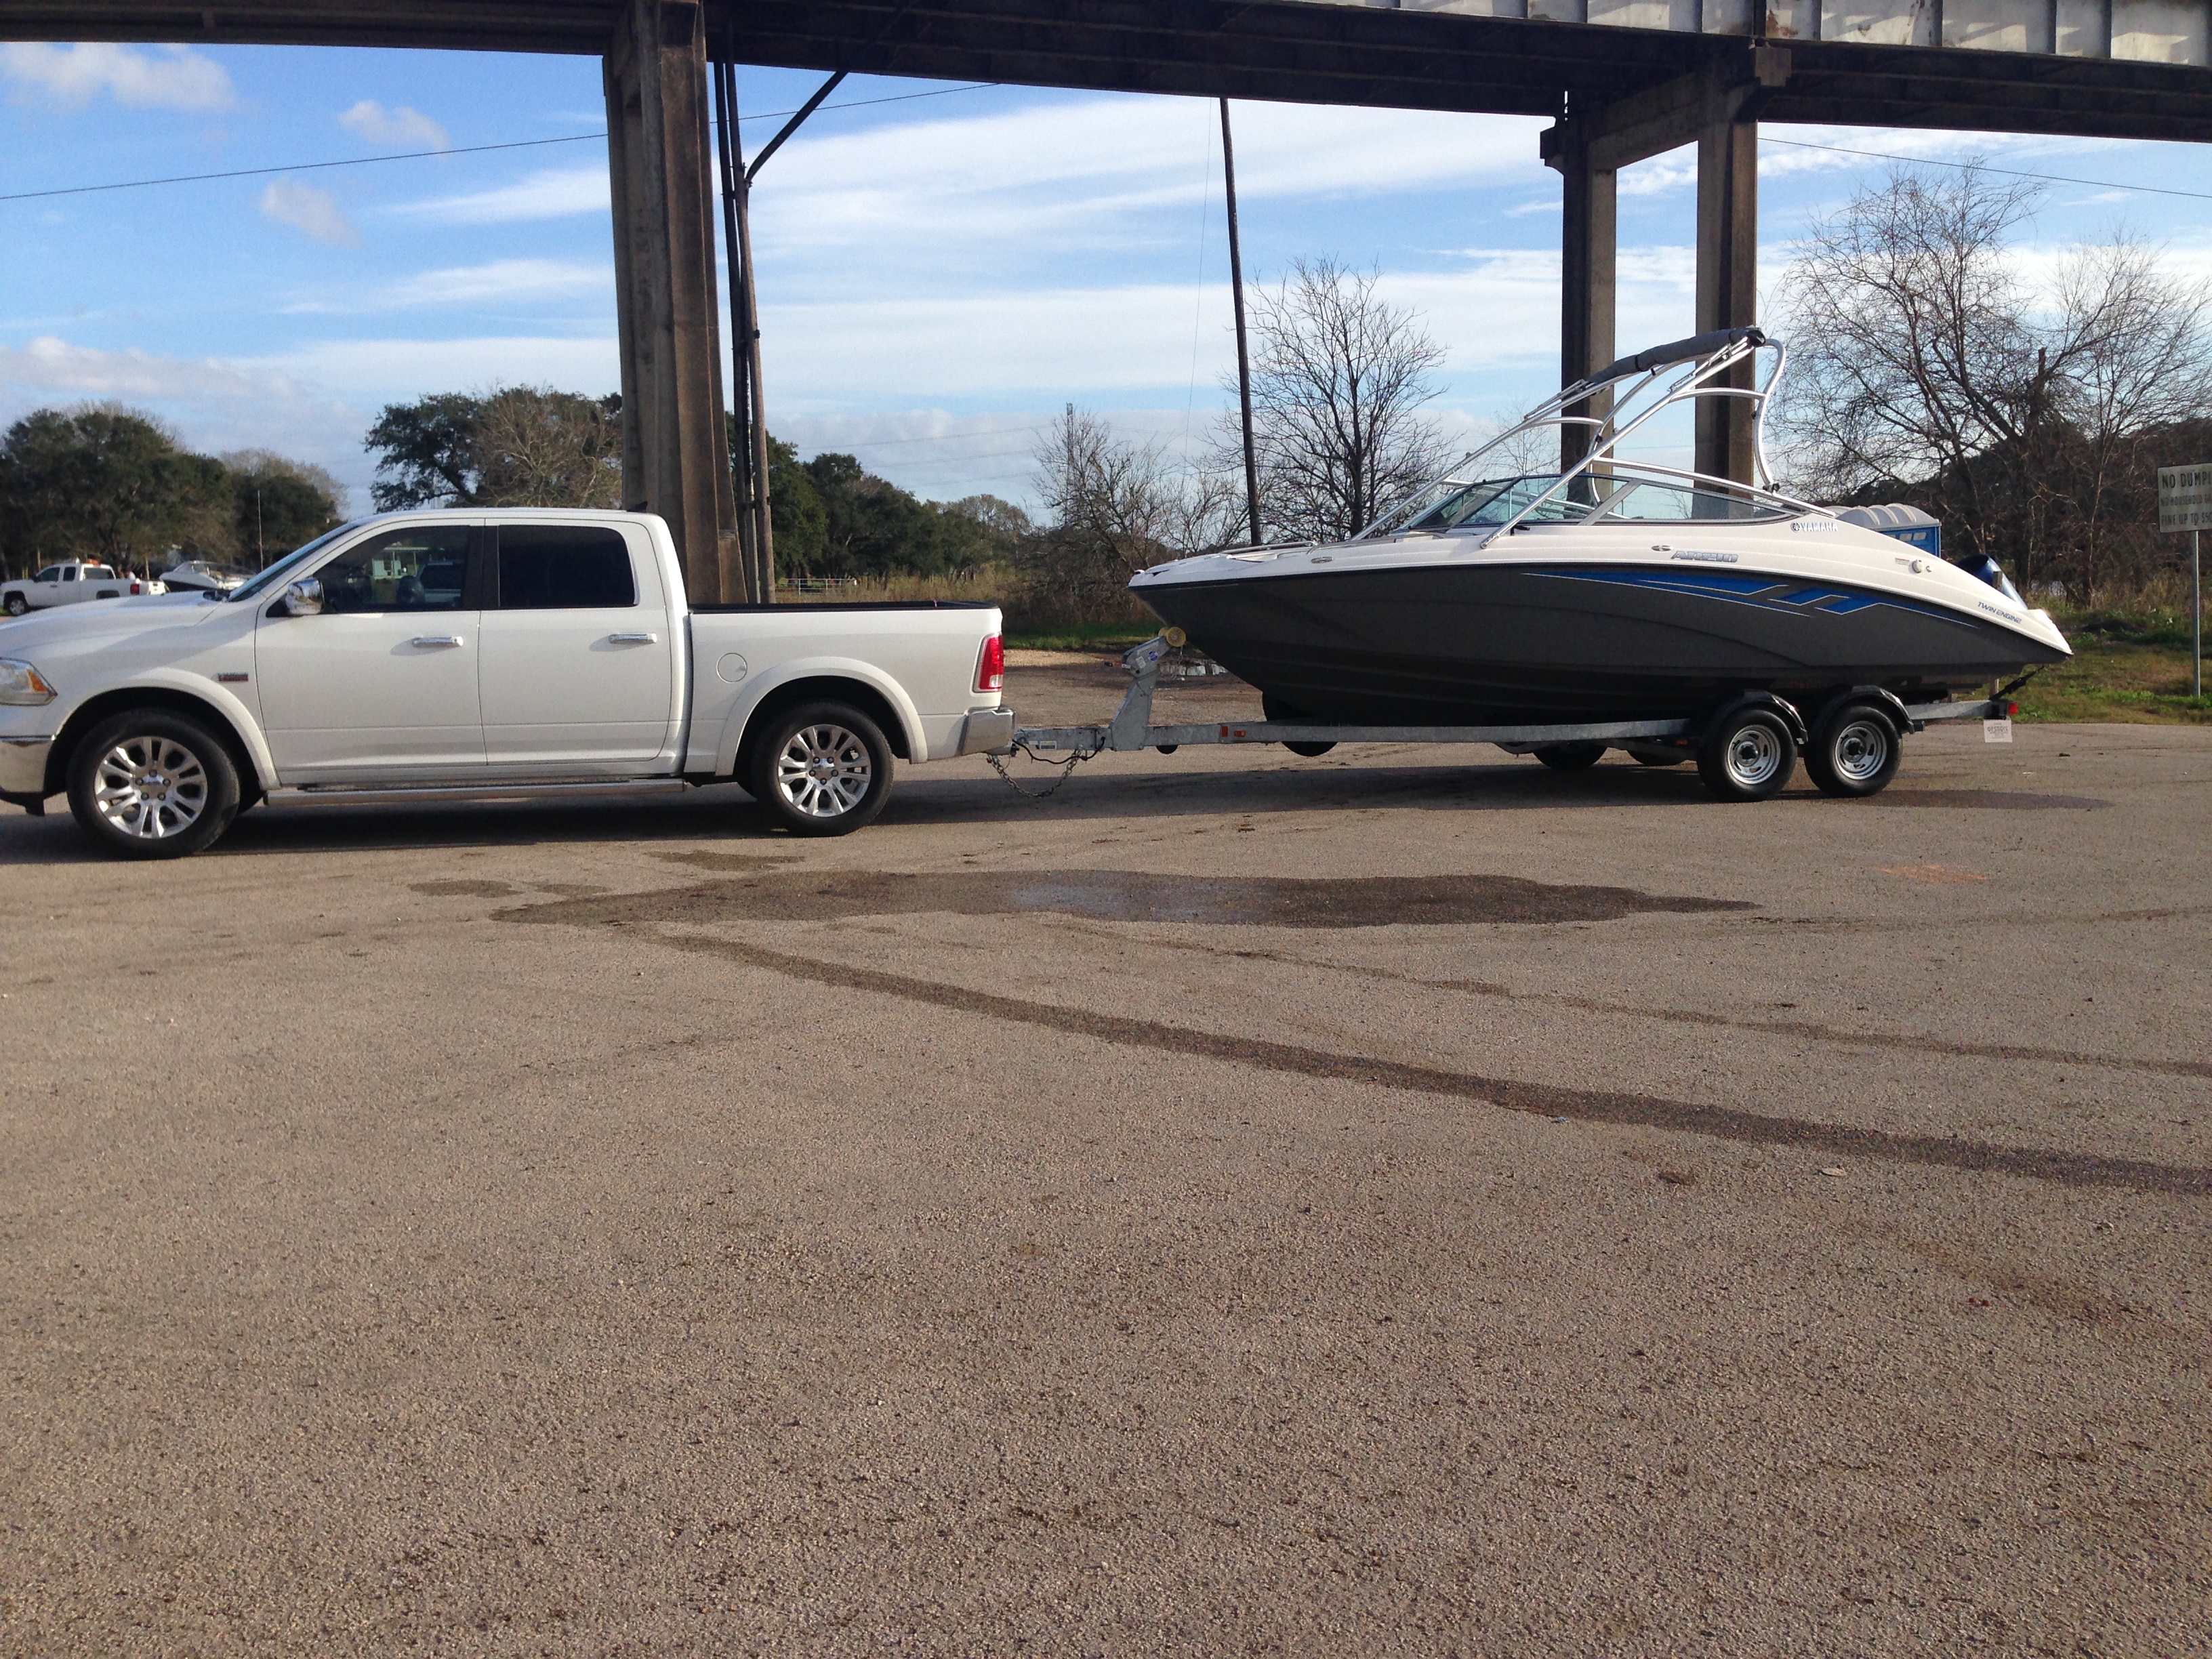 My Tow Rig & Boat.